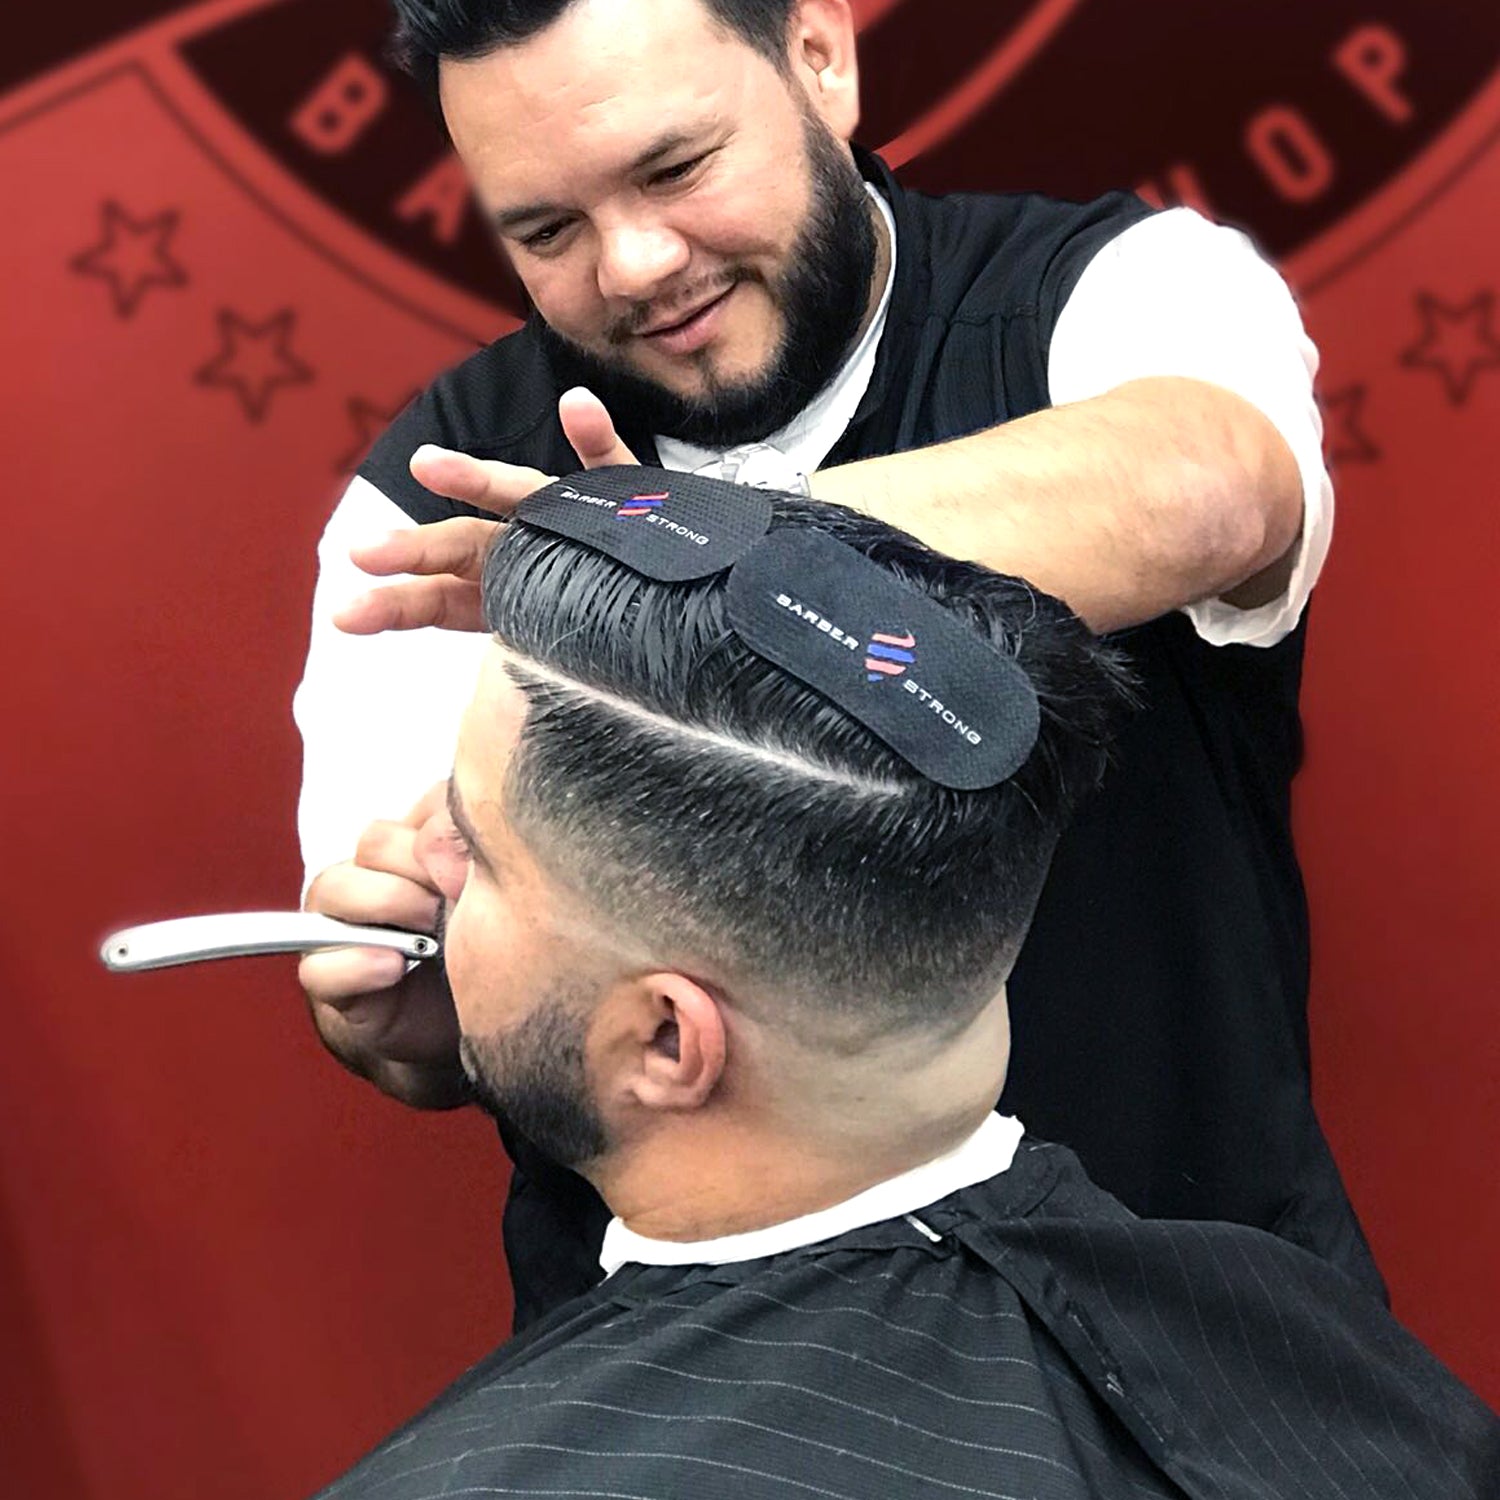 Barber Strong Gripper in Action